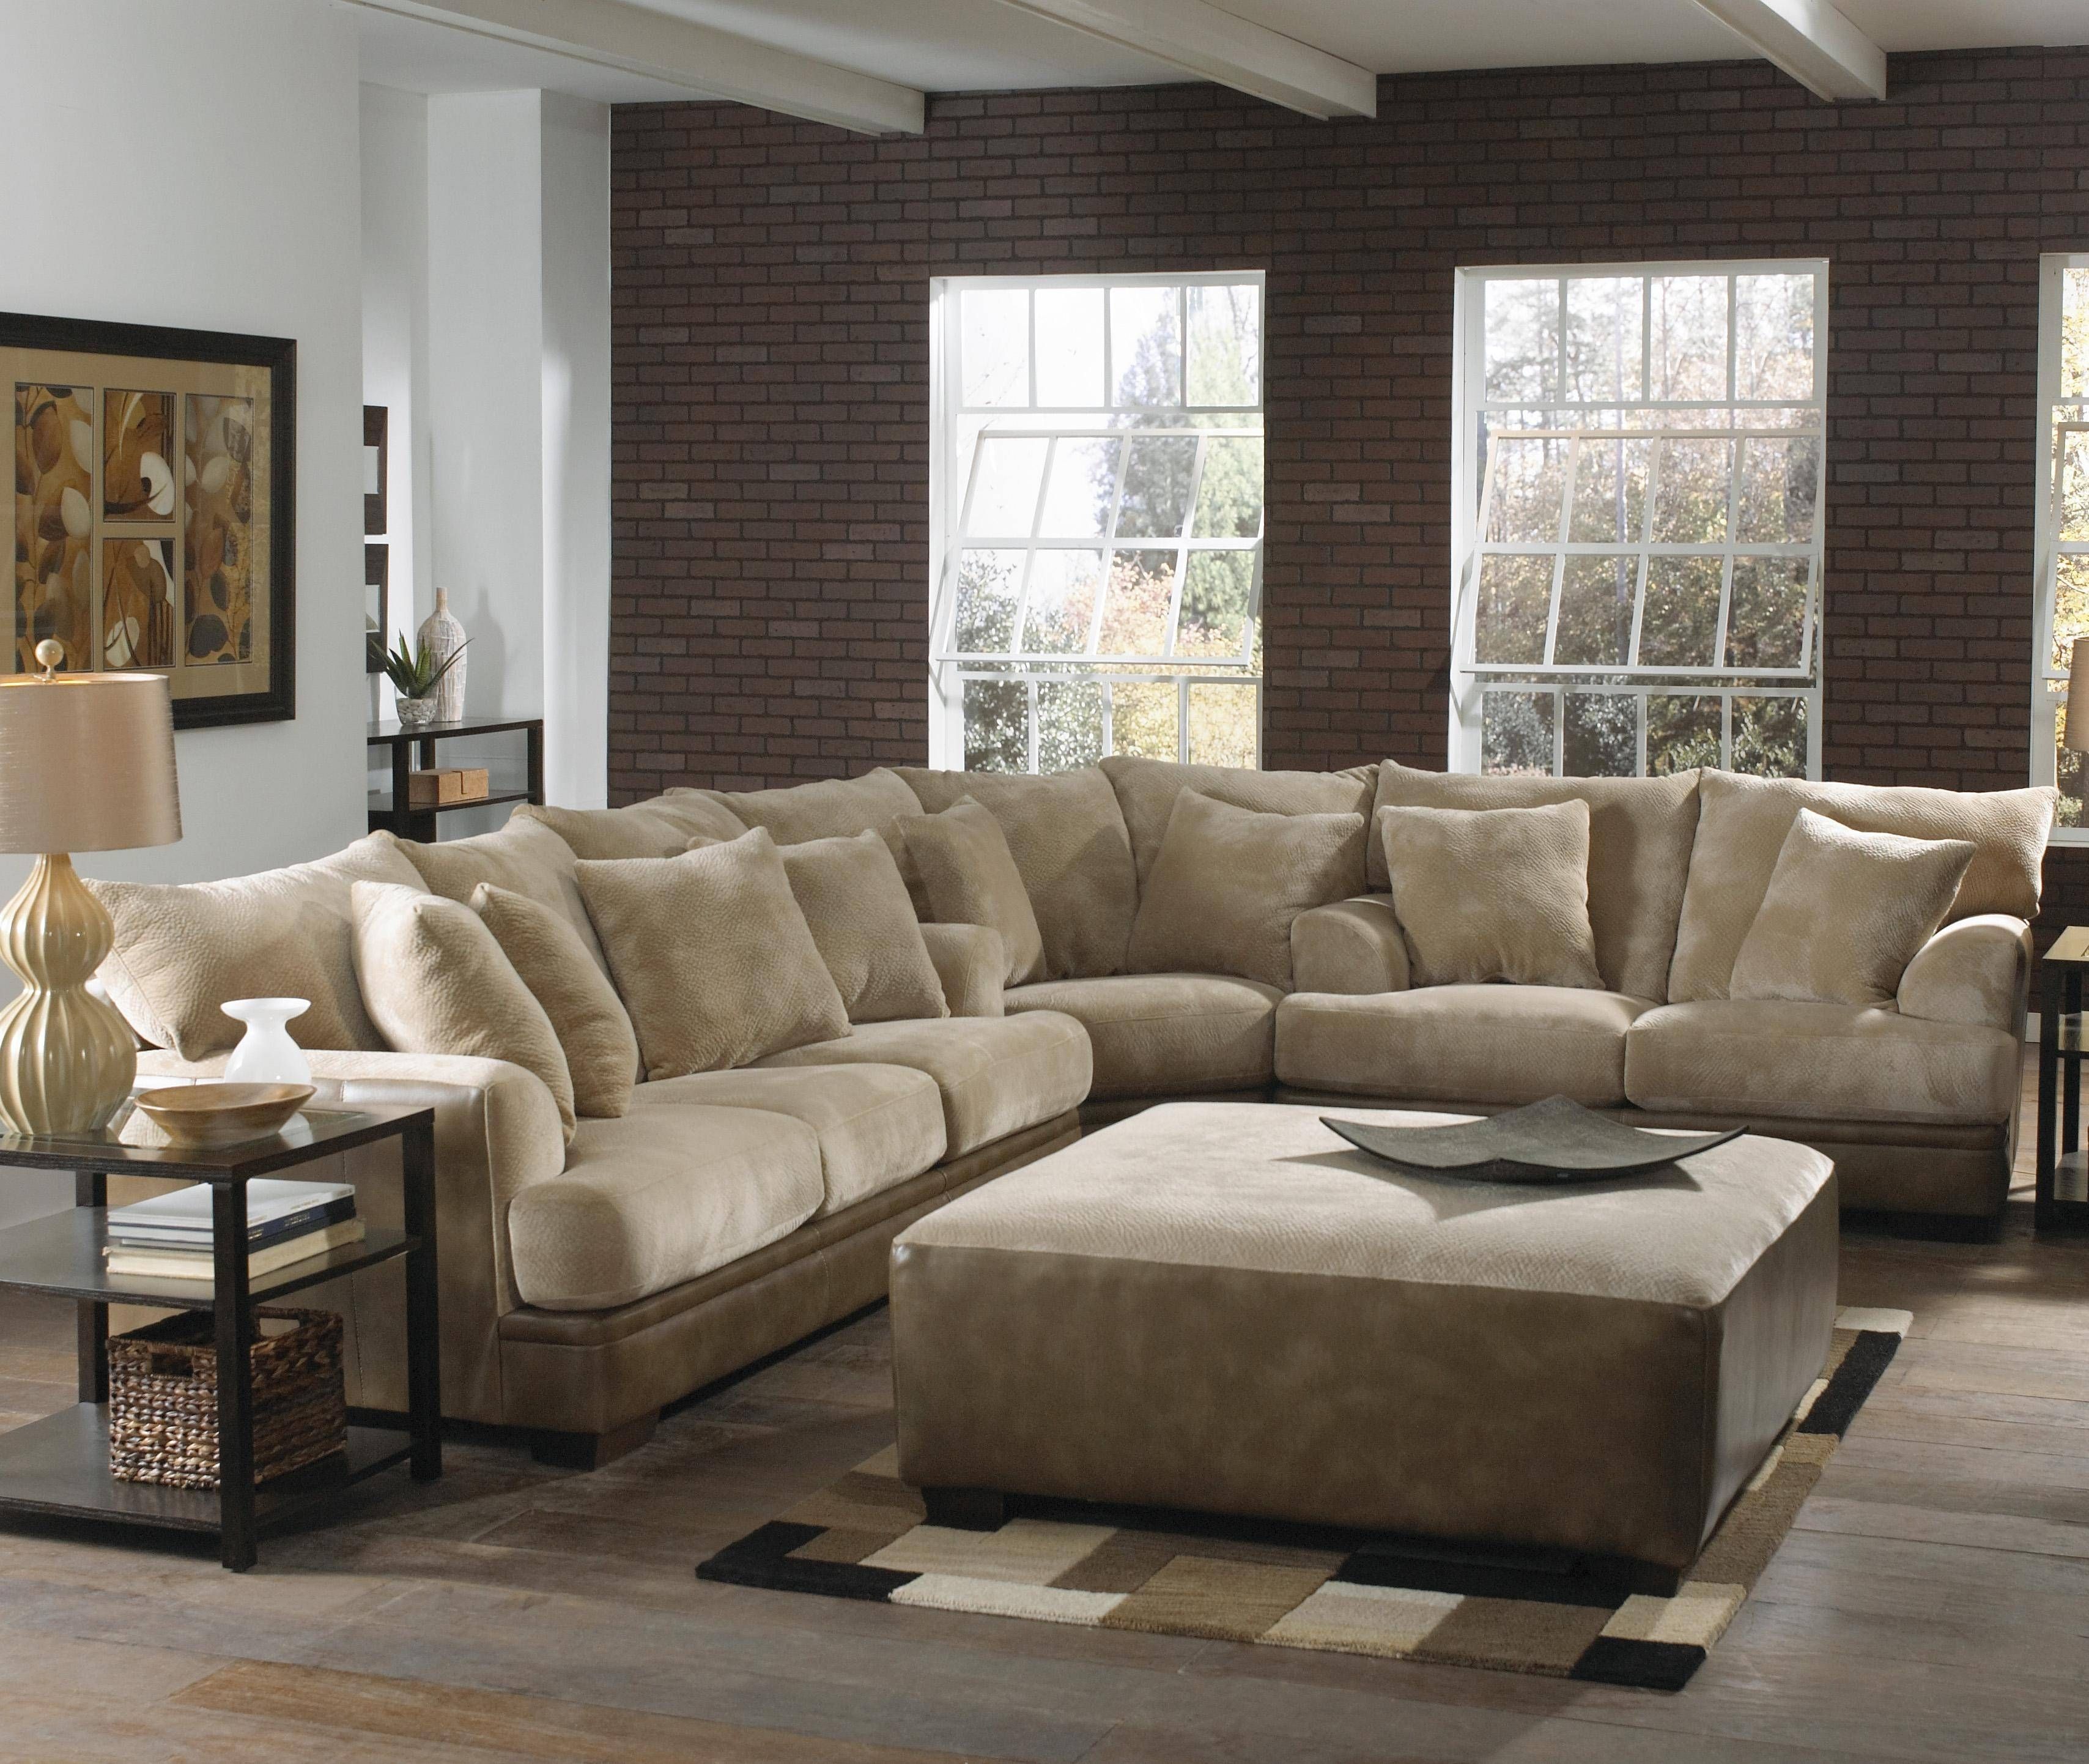 12 Best Collection Of Extra Wide Sectional Sofas Regarding Extra Wide Sectional Sofas (View 4 of 30)